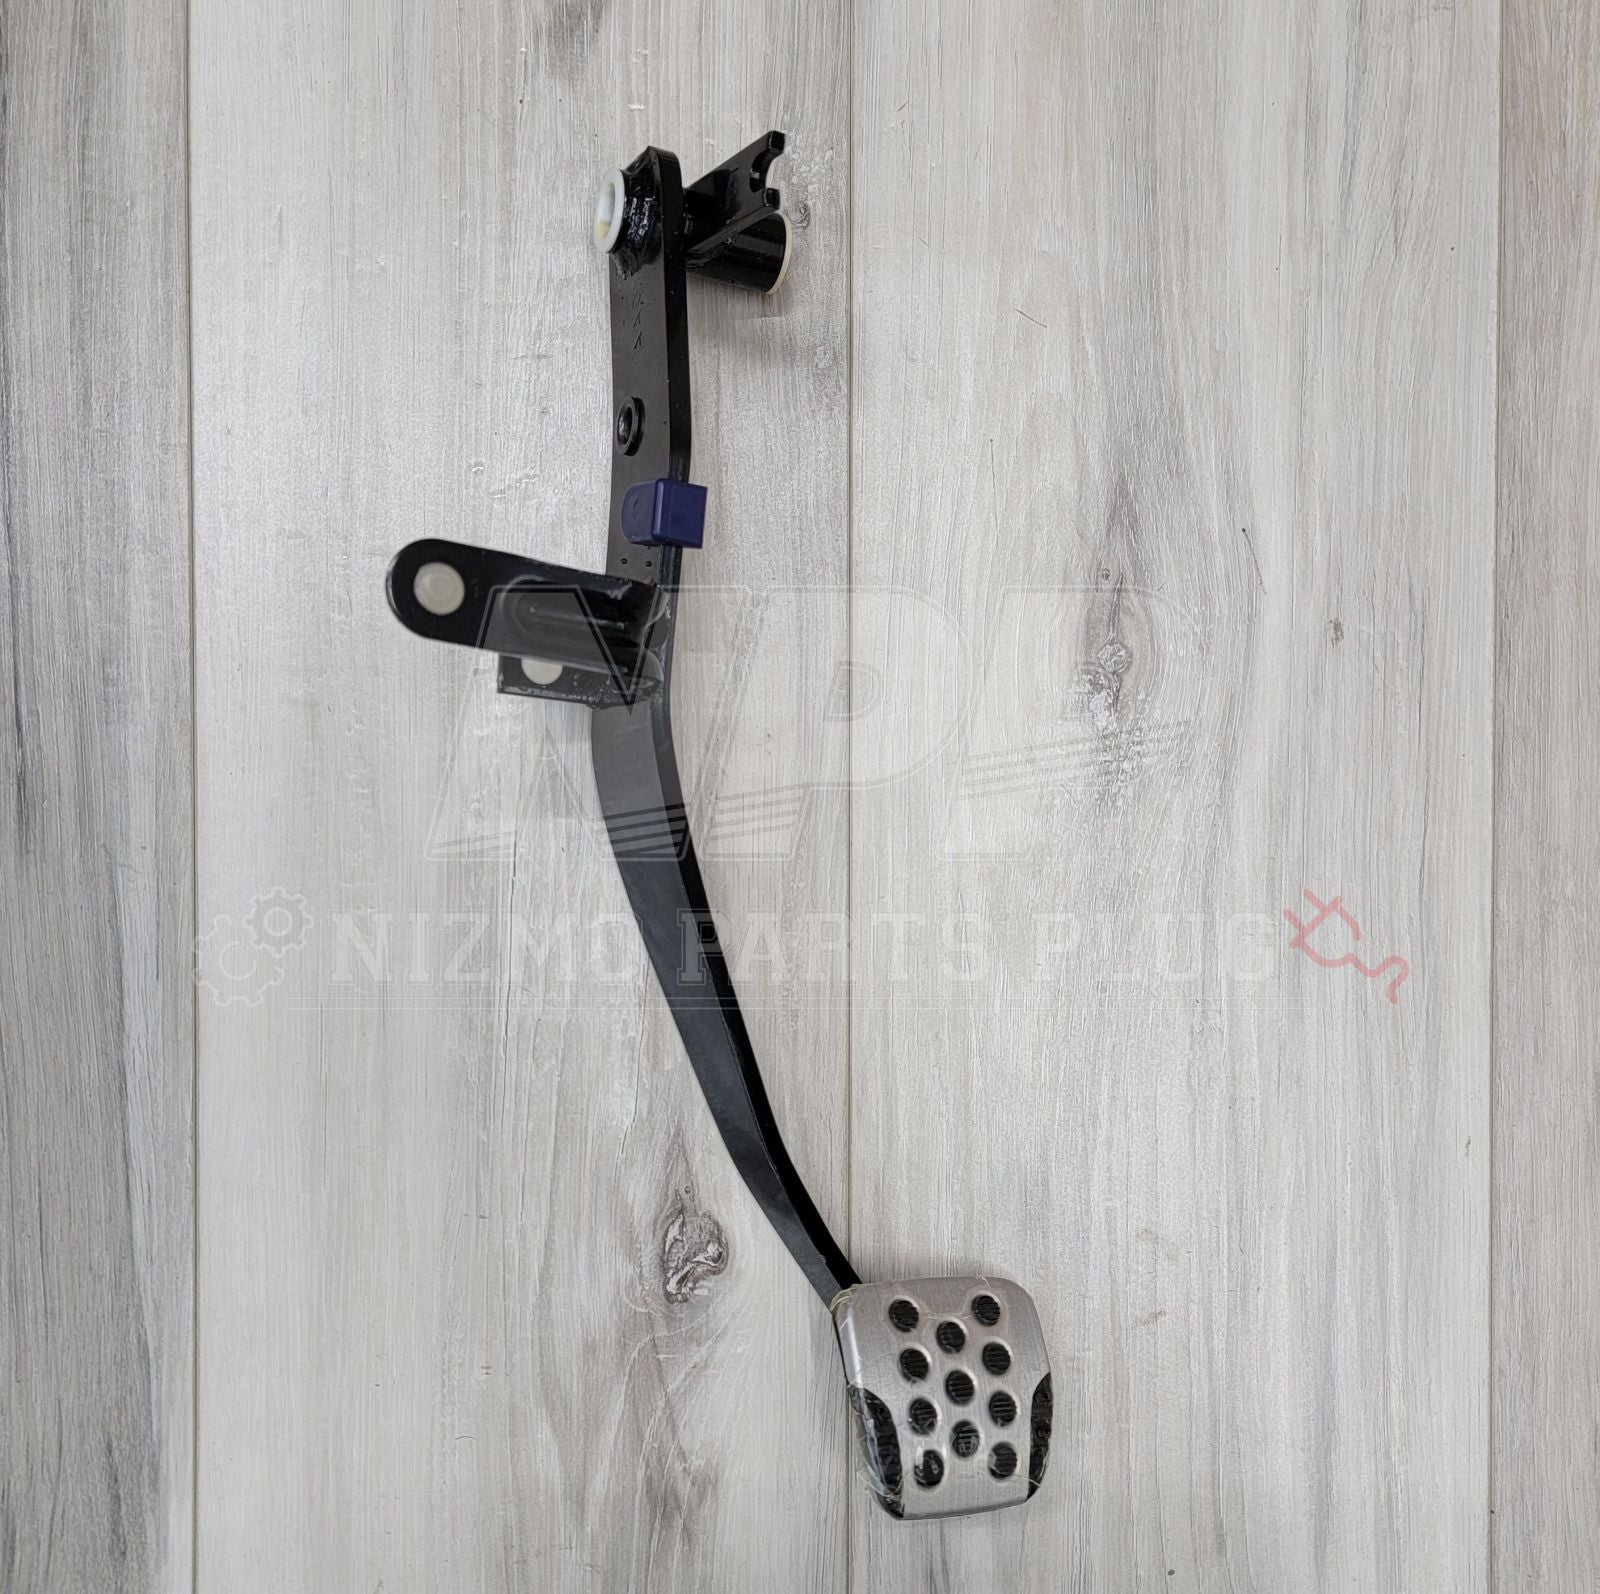 R34 Skyline GT-R Series 2 Clutch Pedal Assembly